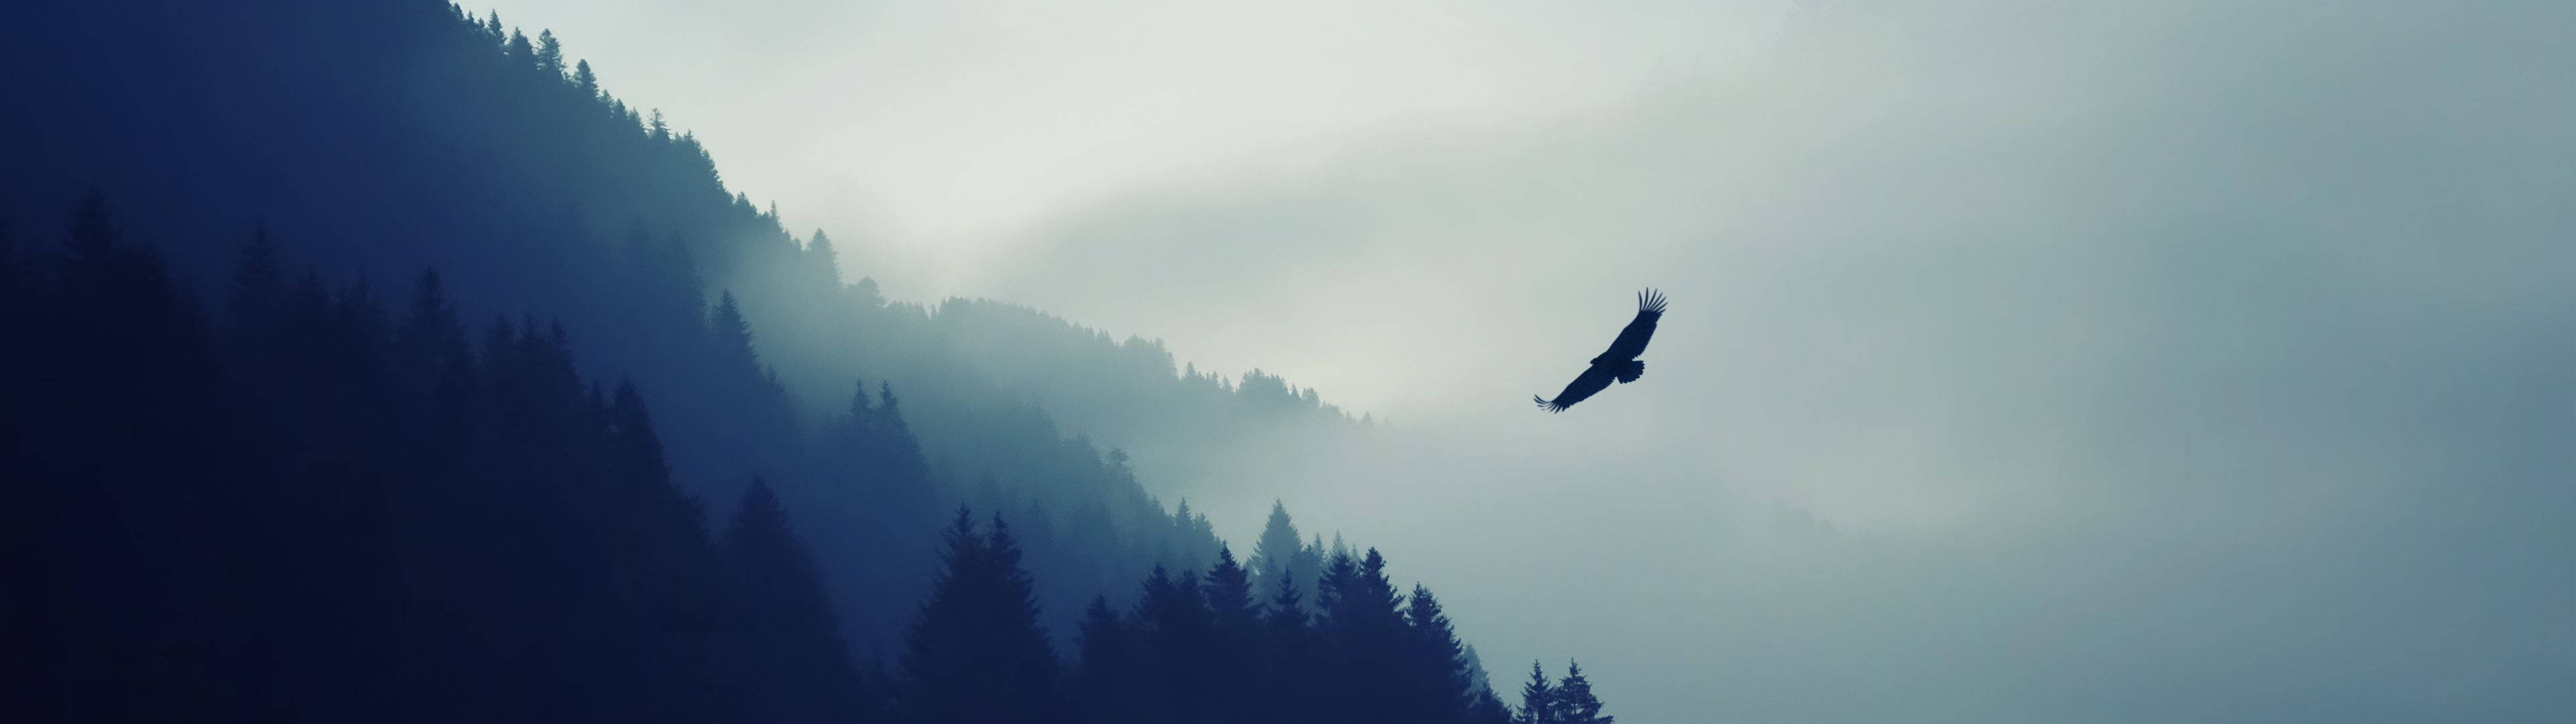 Image View Of Majestic Eagle Soaring Over Mountainside. Background